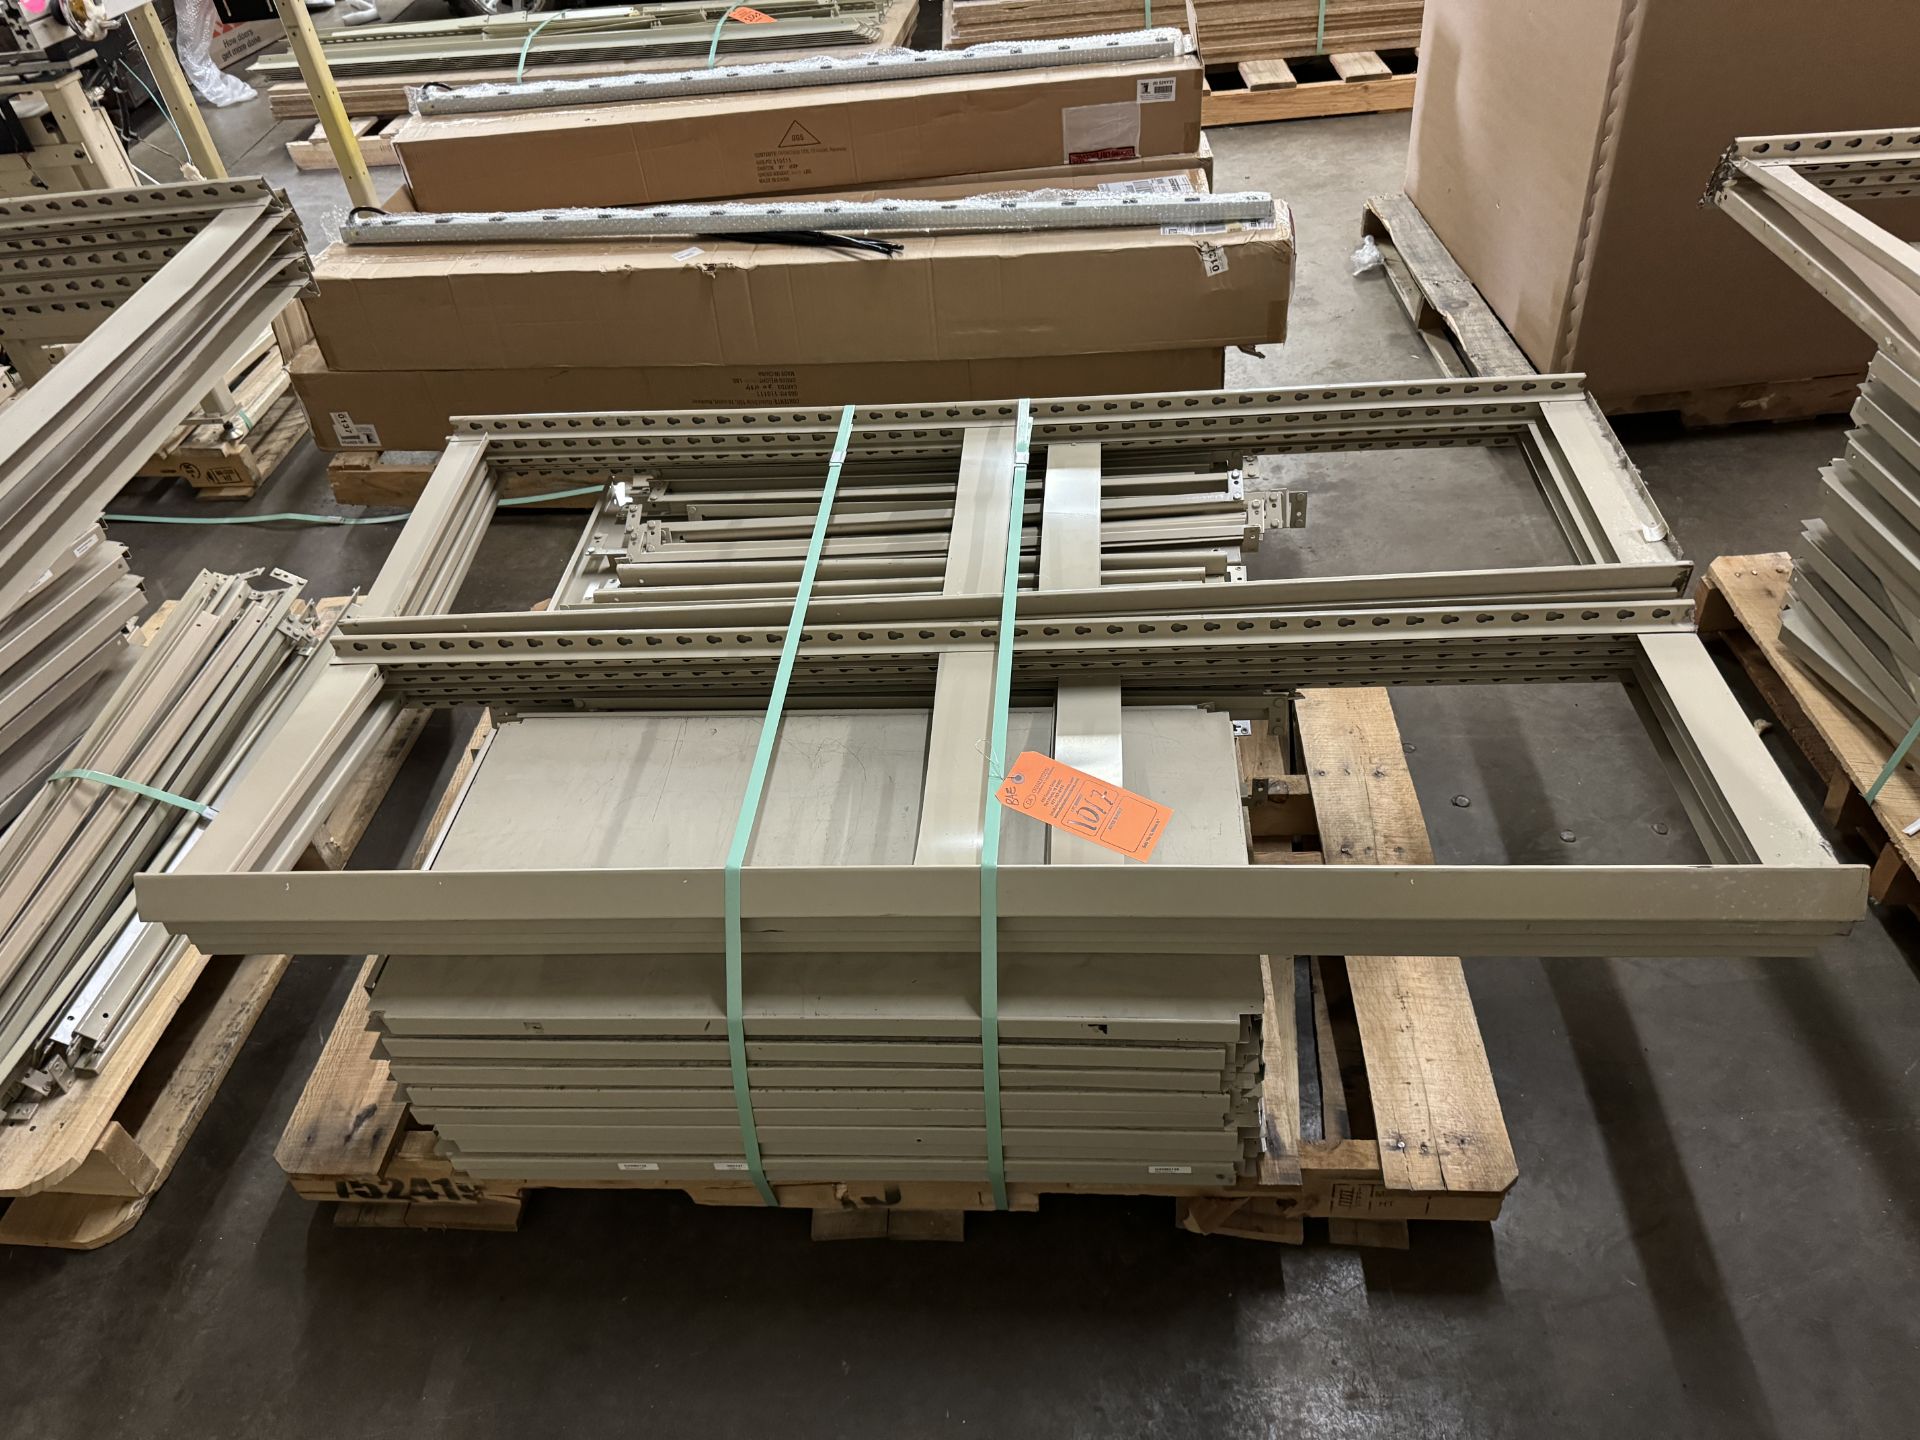 PALLET WITH STEEL RACKING